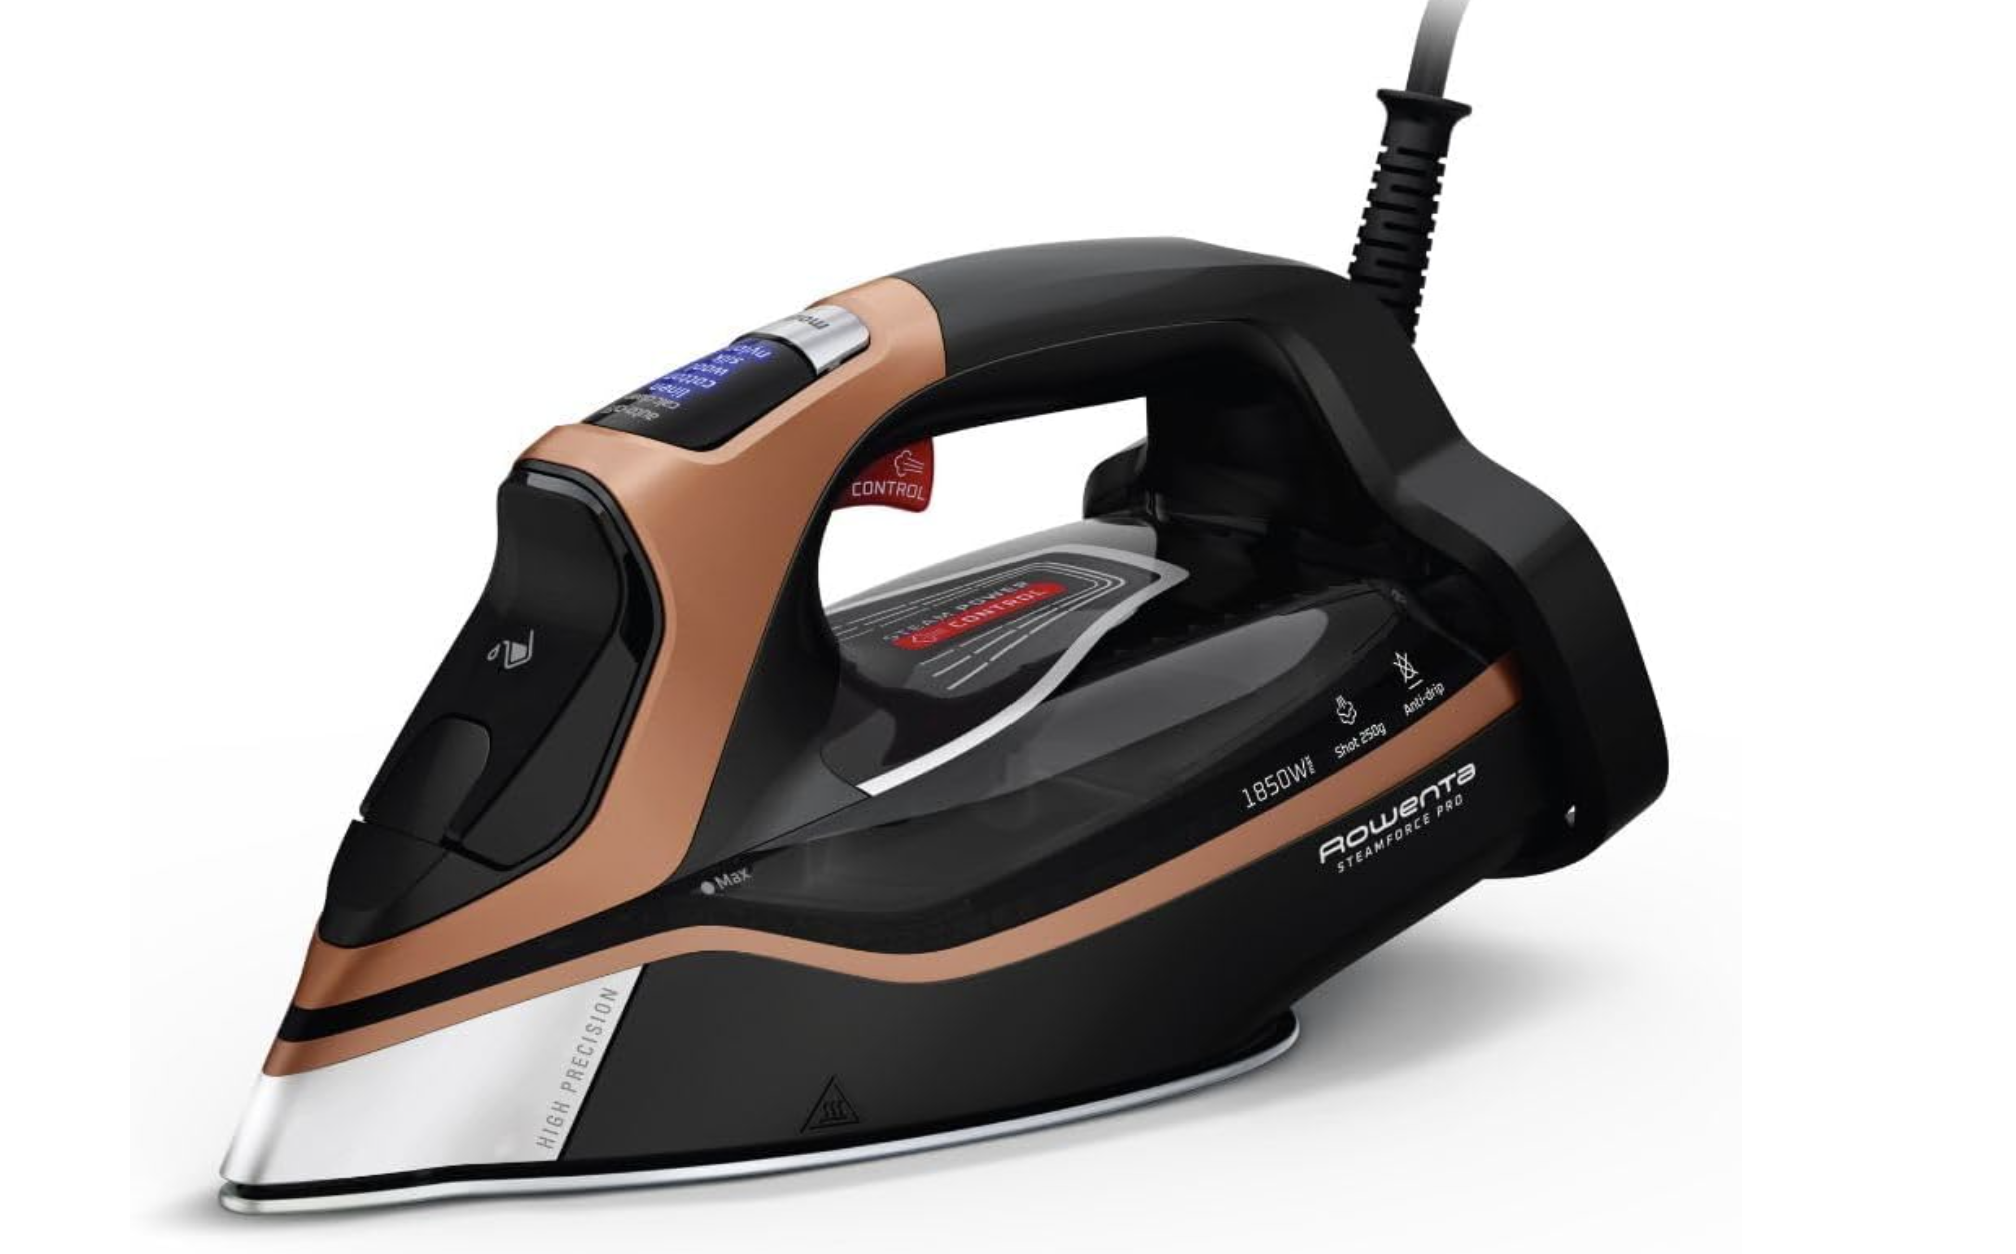 Reviews for BLACK+DECKER Allure Pro Black Steam Iron with Comfort